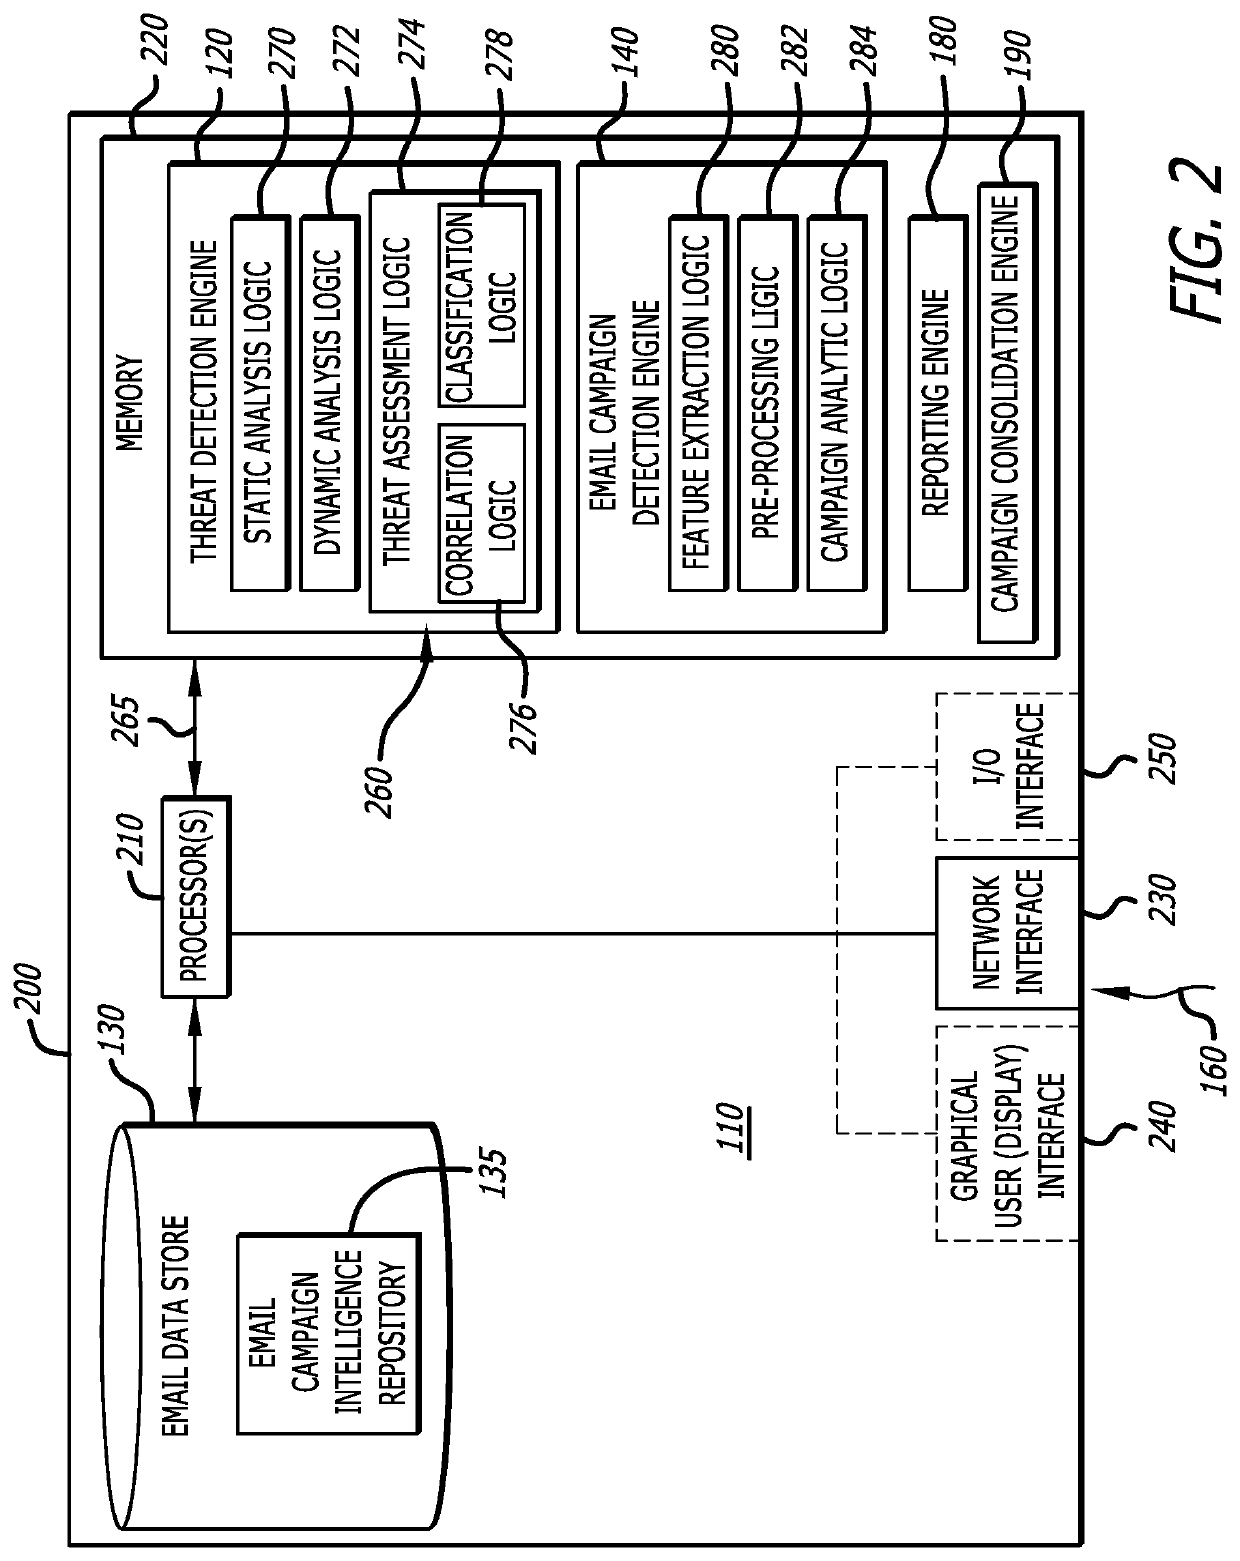 System and method for detecting repetitive cybersecurity attacks constituting an email campaign